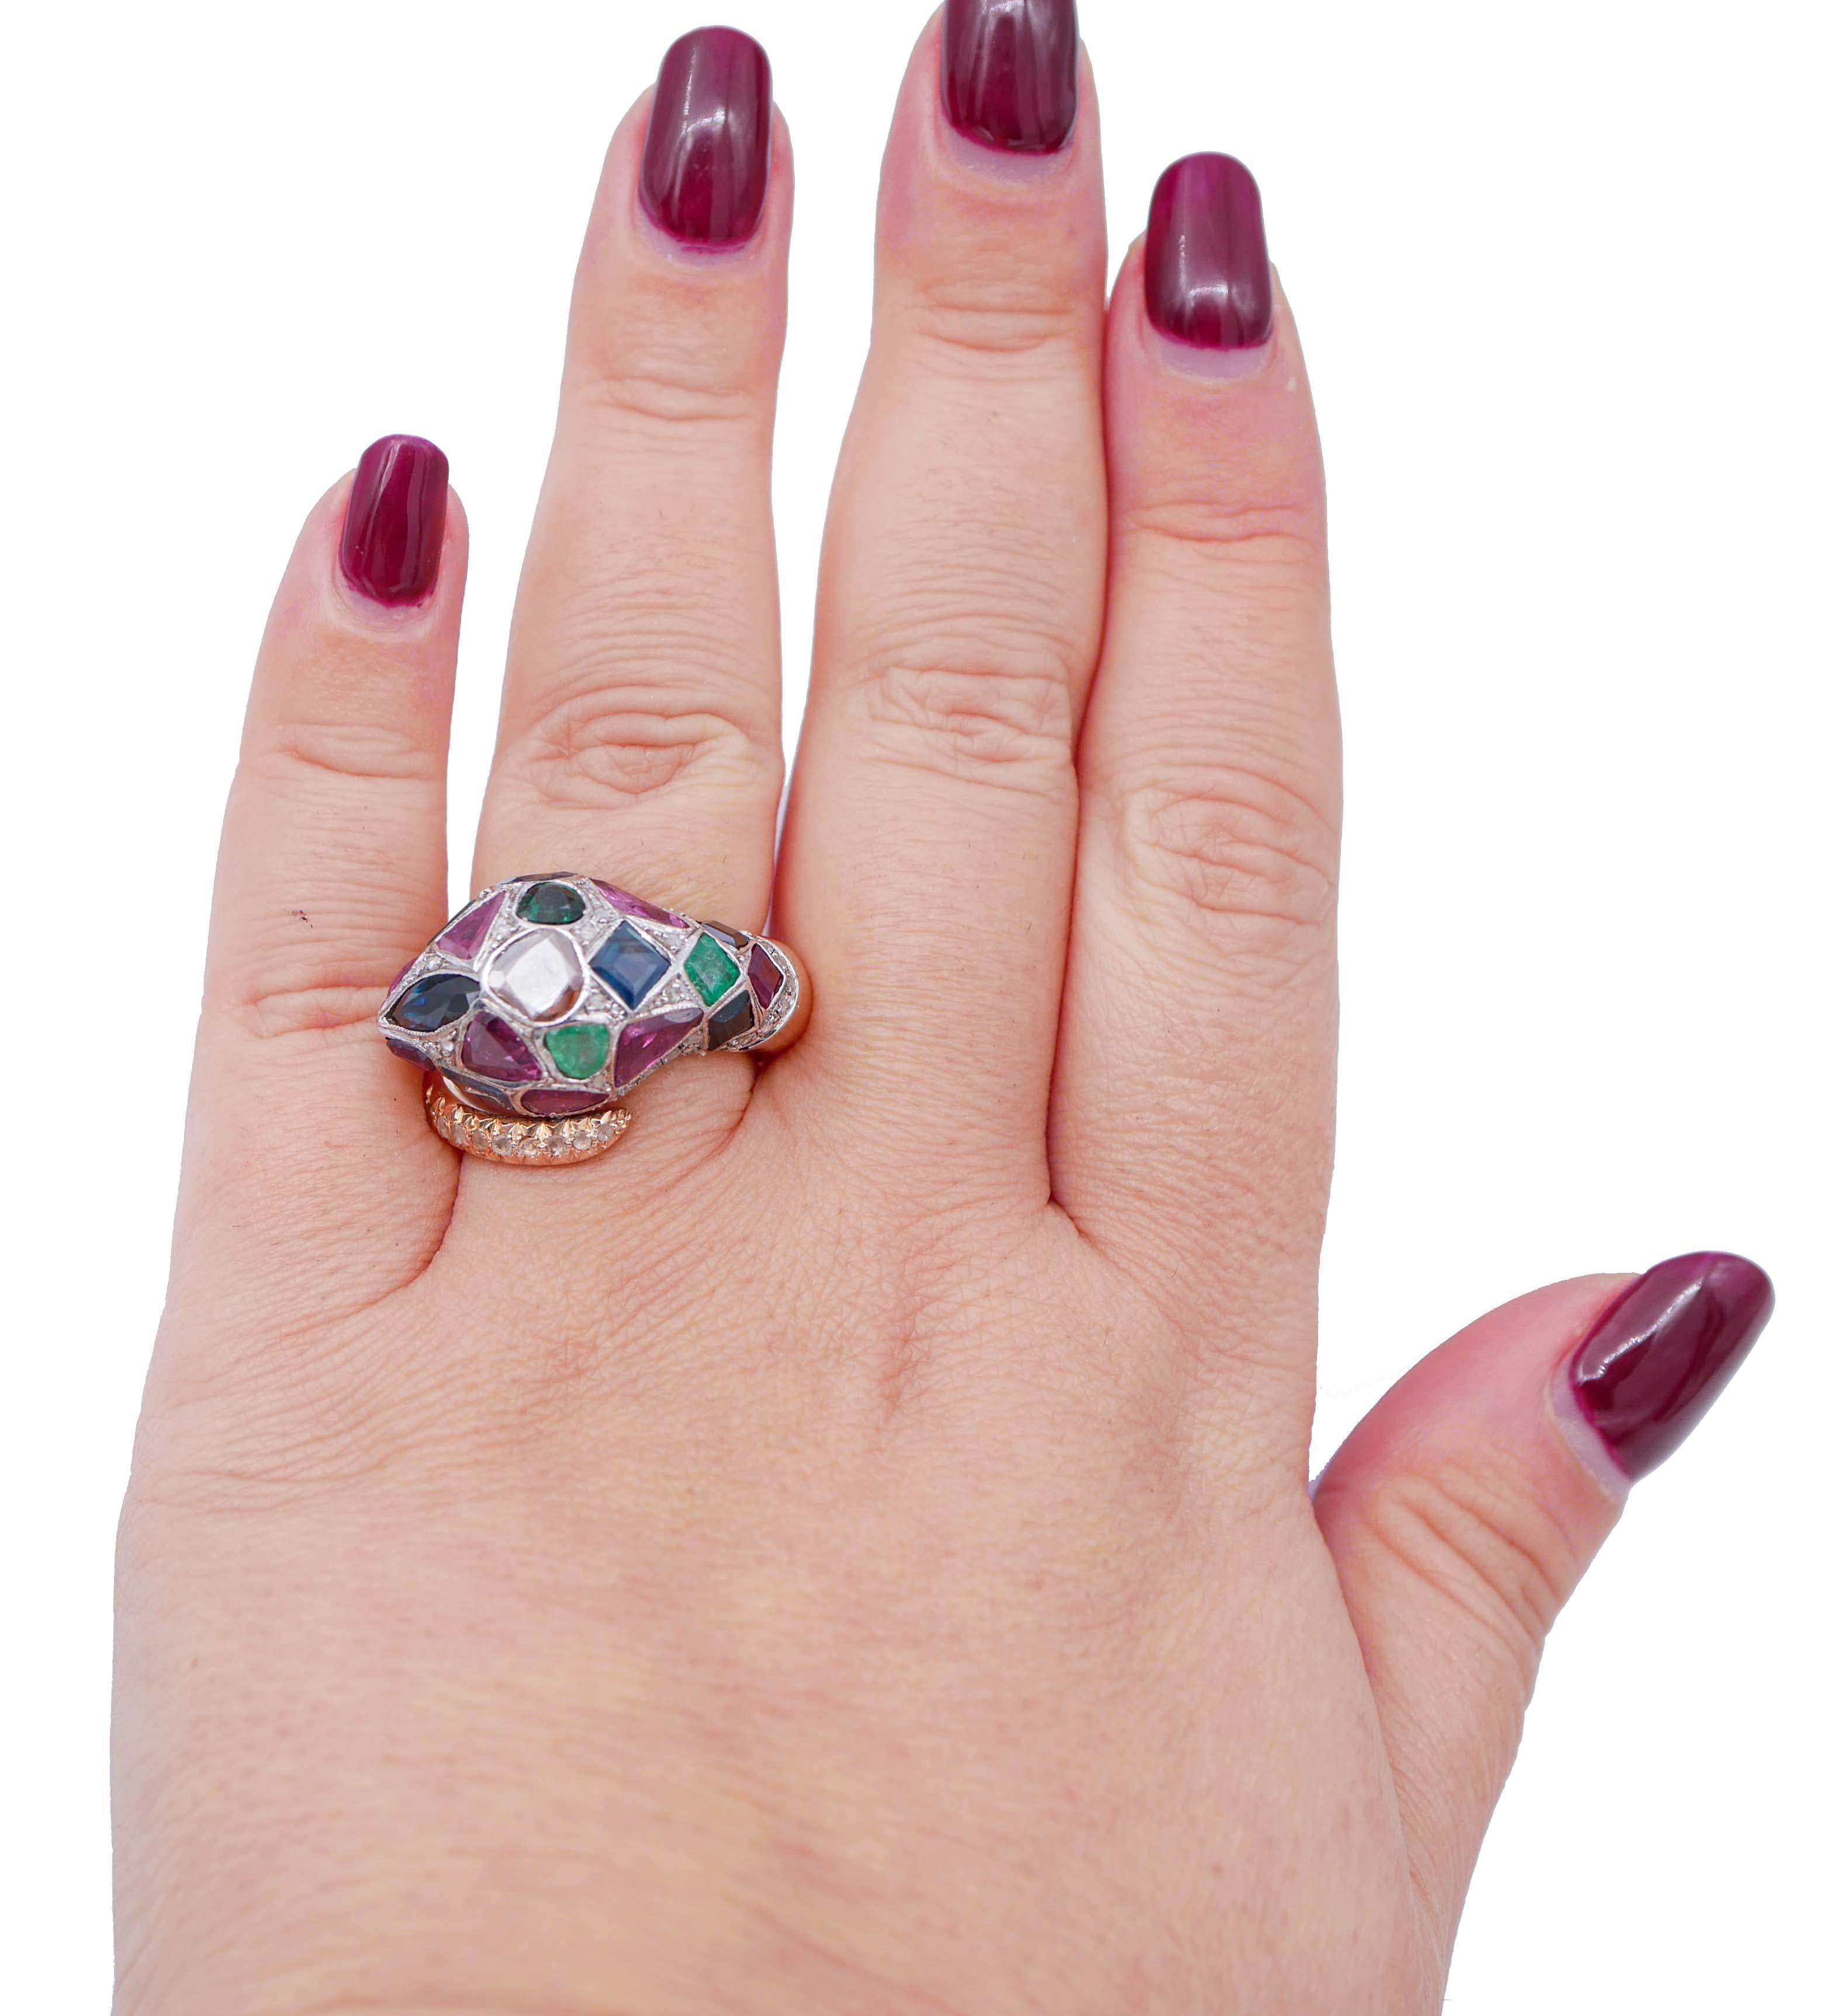 Mixed Cut Emeralds, Rubies, Sapphires, Diamonds, 14 Kt Rose Gold and Silver Snake Ring